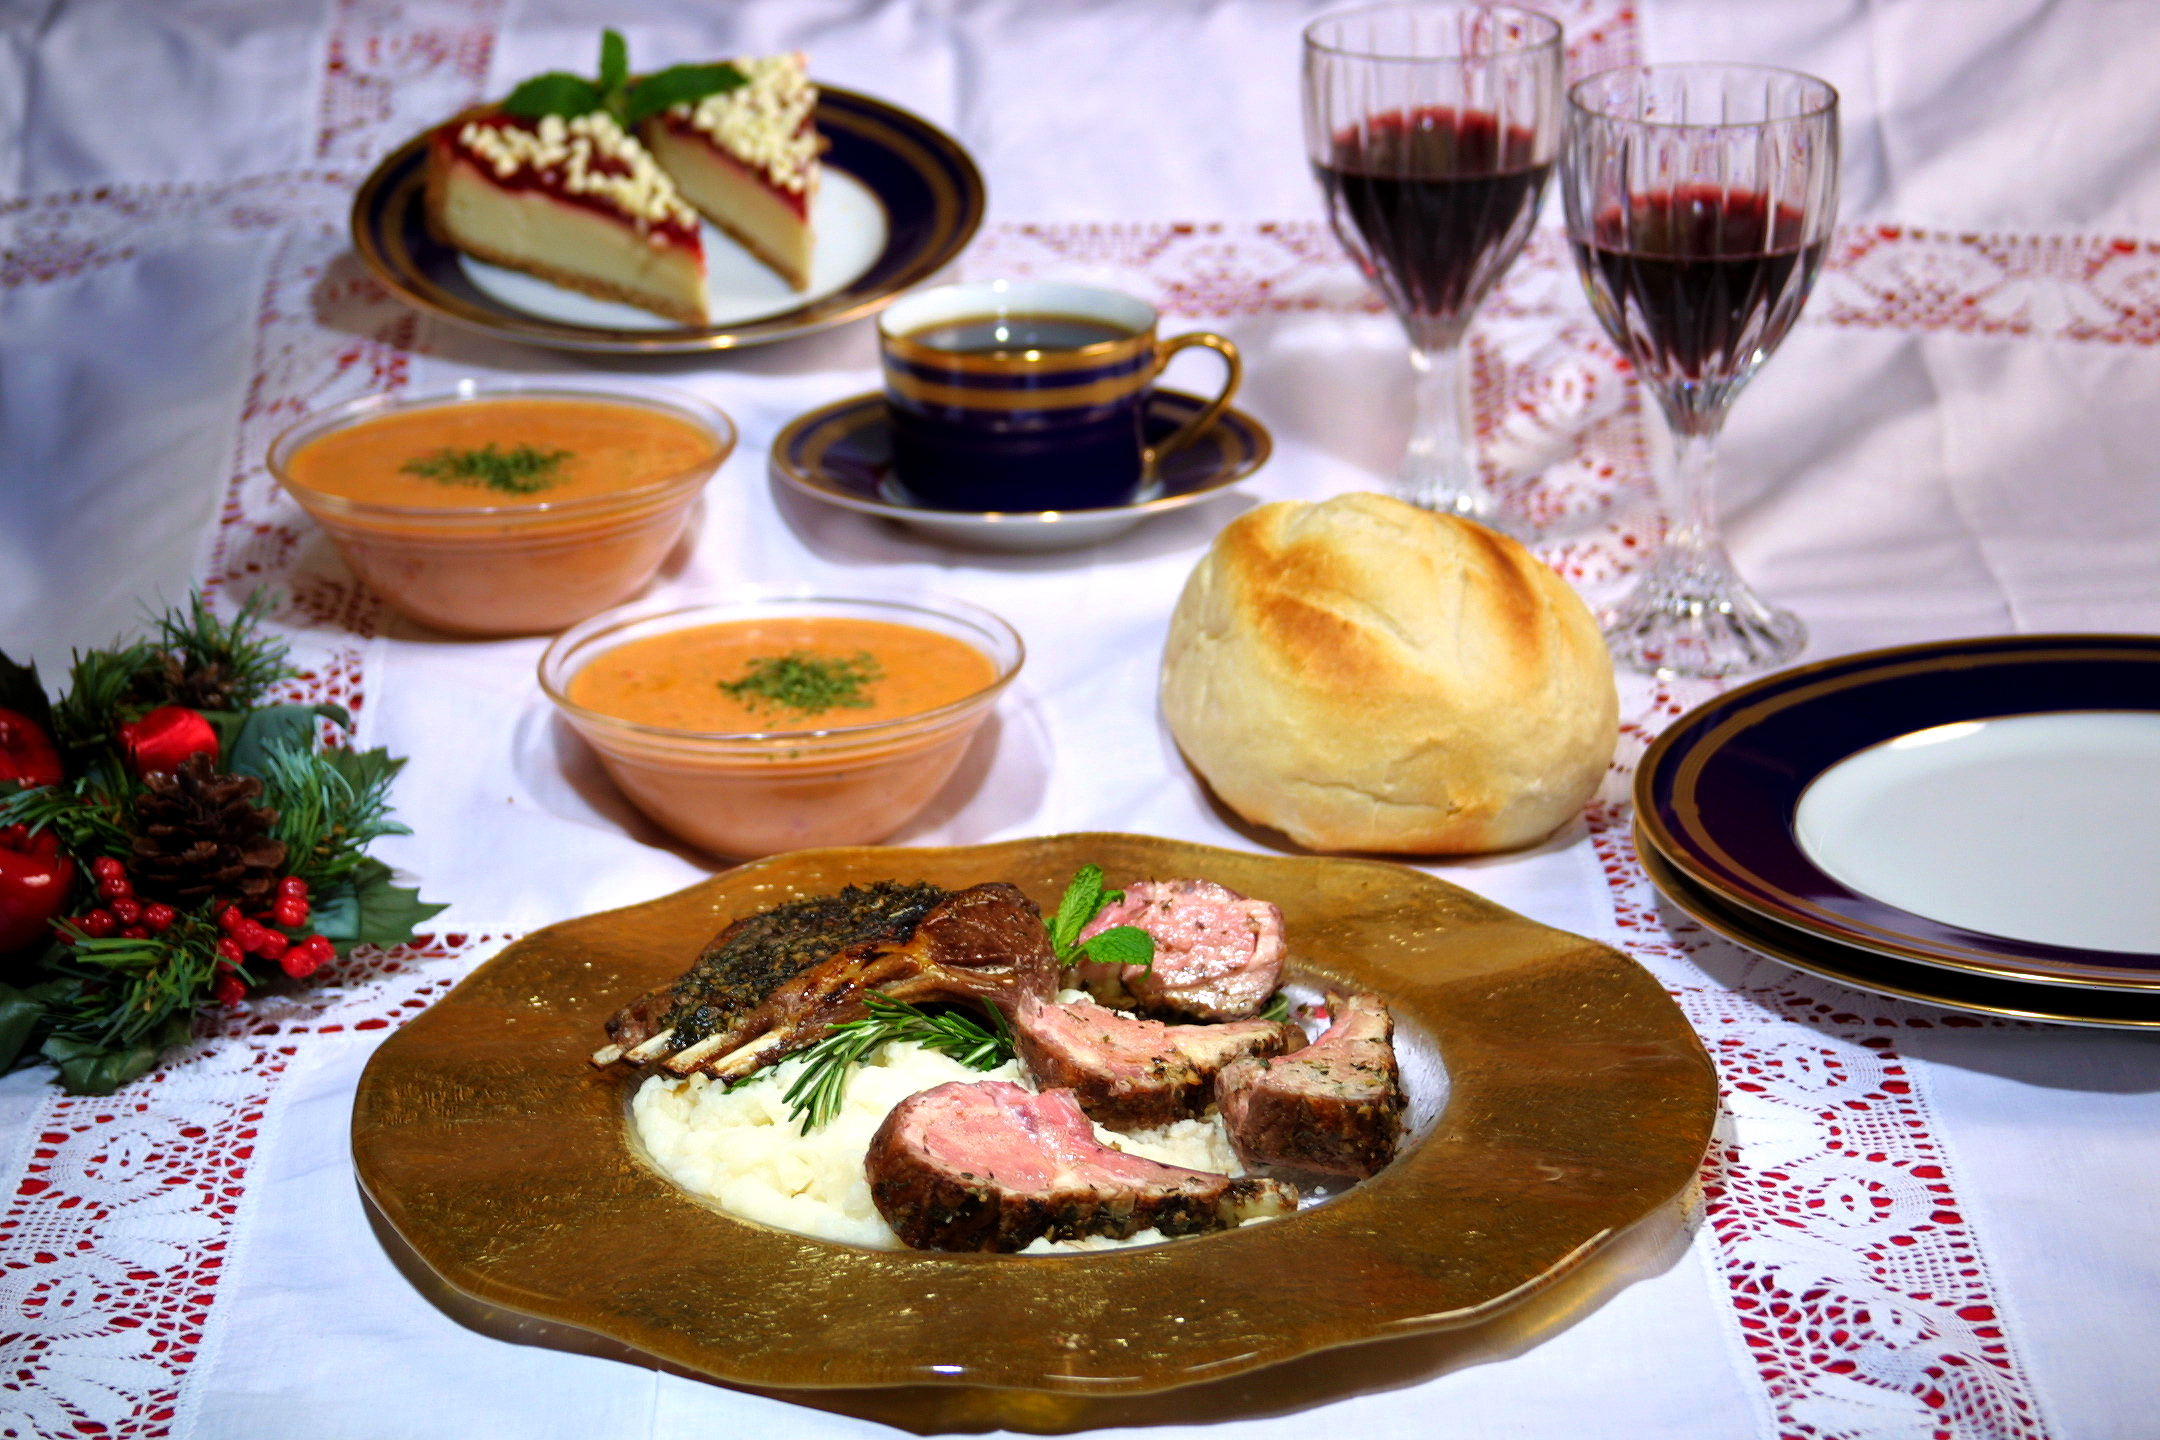 GourmetStation, Provider of Upscale Gourmet Food Gifts and Gourmet